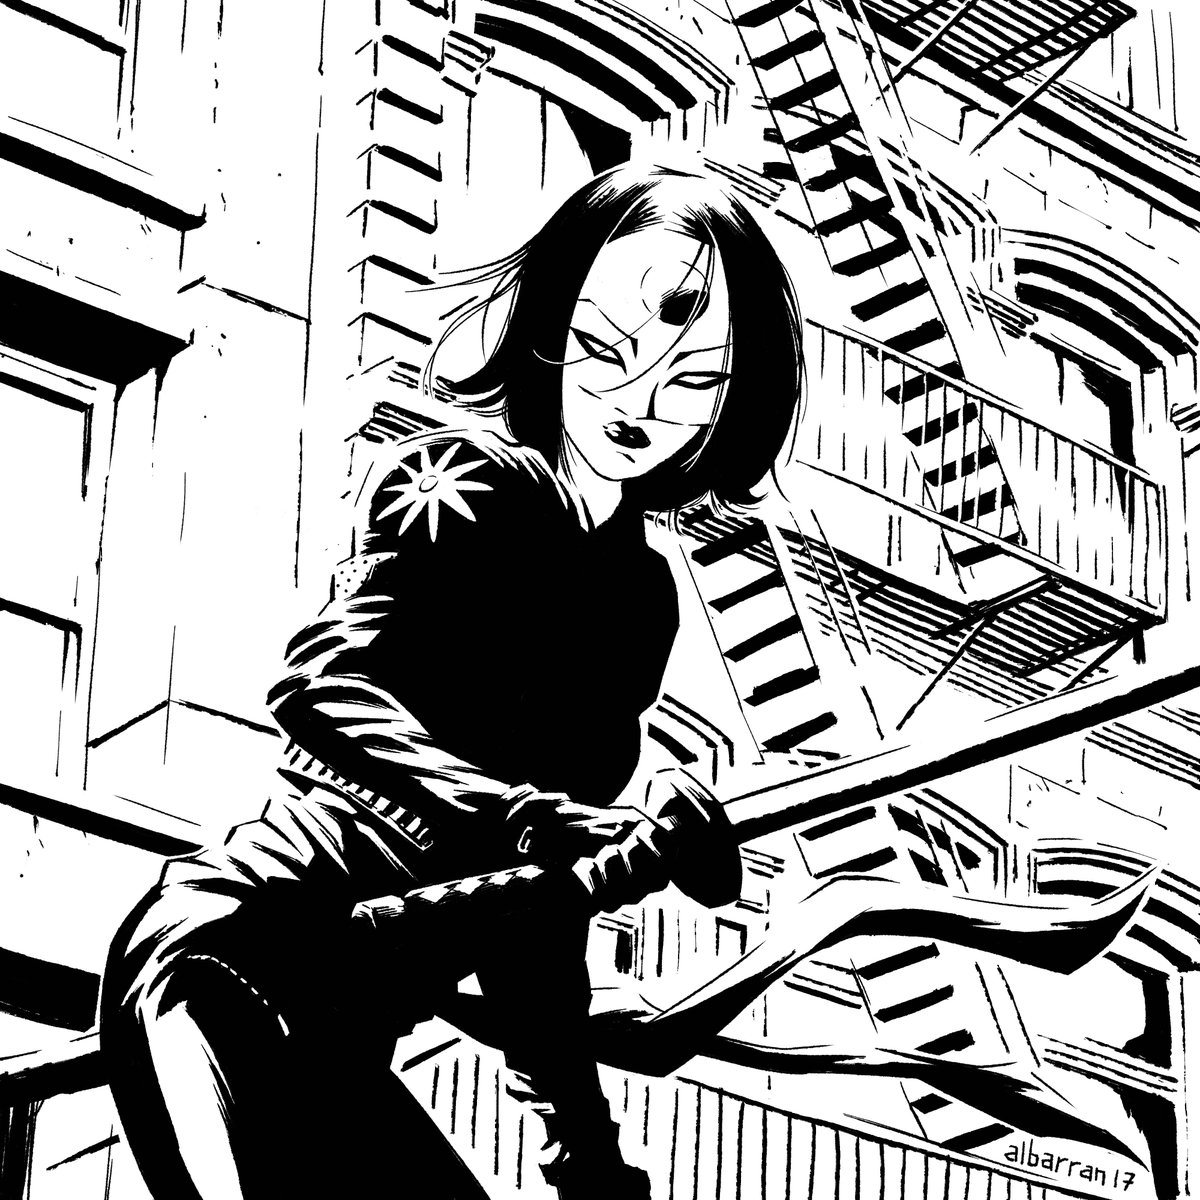 Sketch of the day, Katana! These inking brushes by @kyletwebster kick some serious ass 